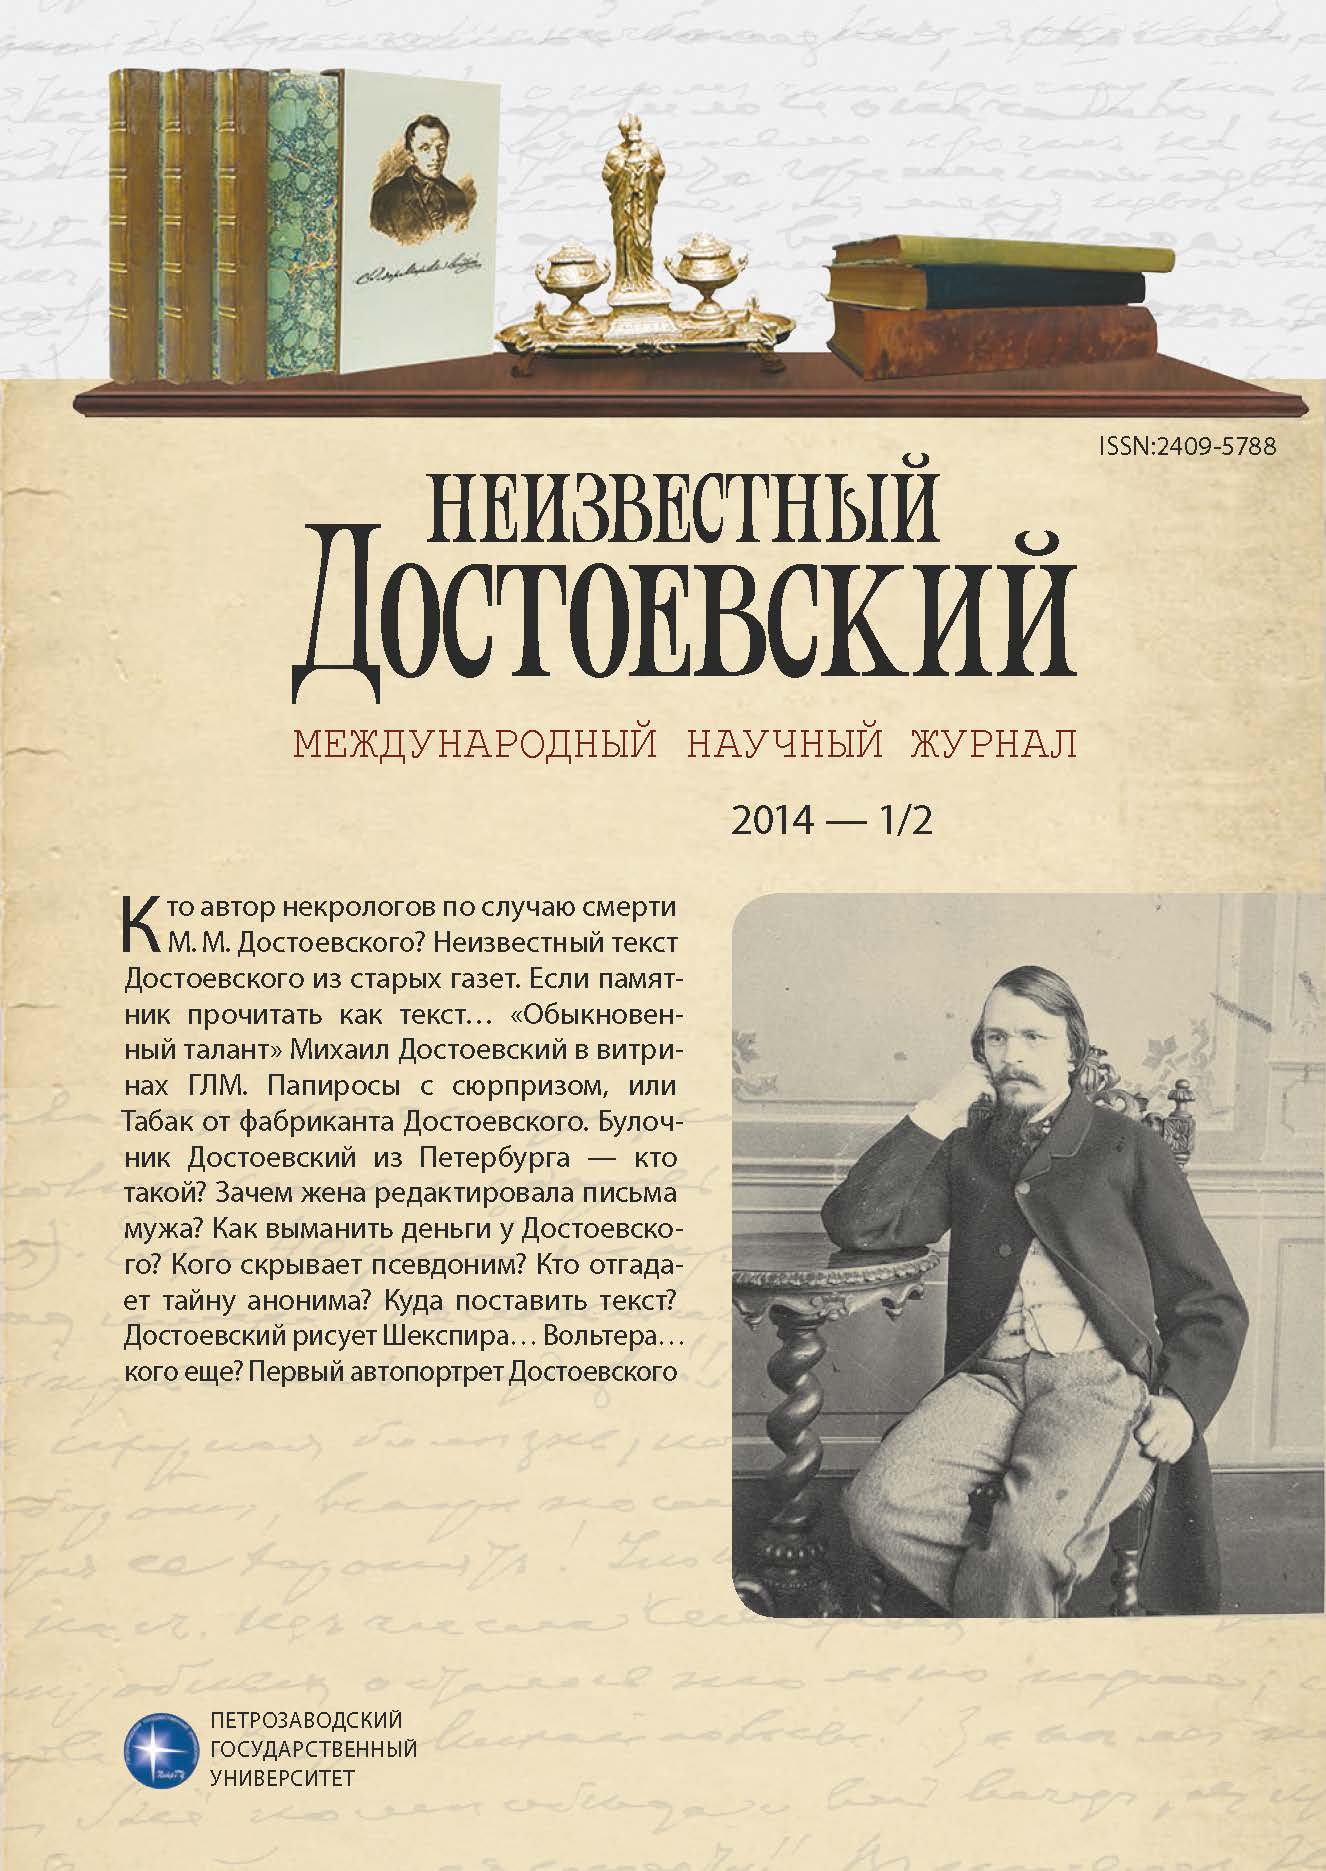 Memoirs in Extenso: Dostoevsky in Memoirs, Notebooks and Diaries on the Website of the Pushkin House Cover Image